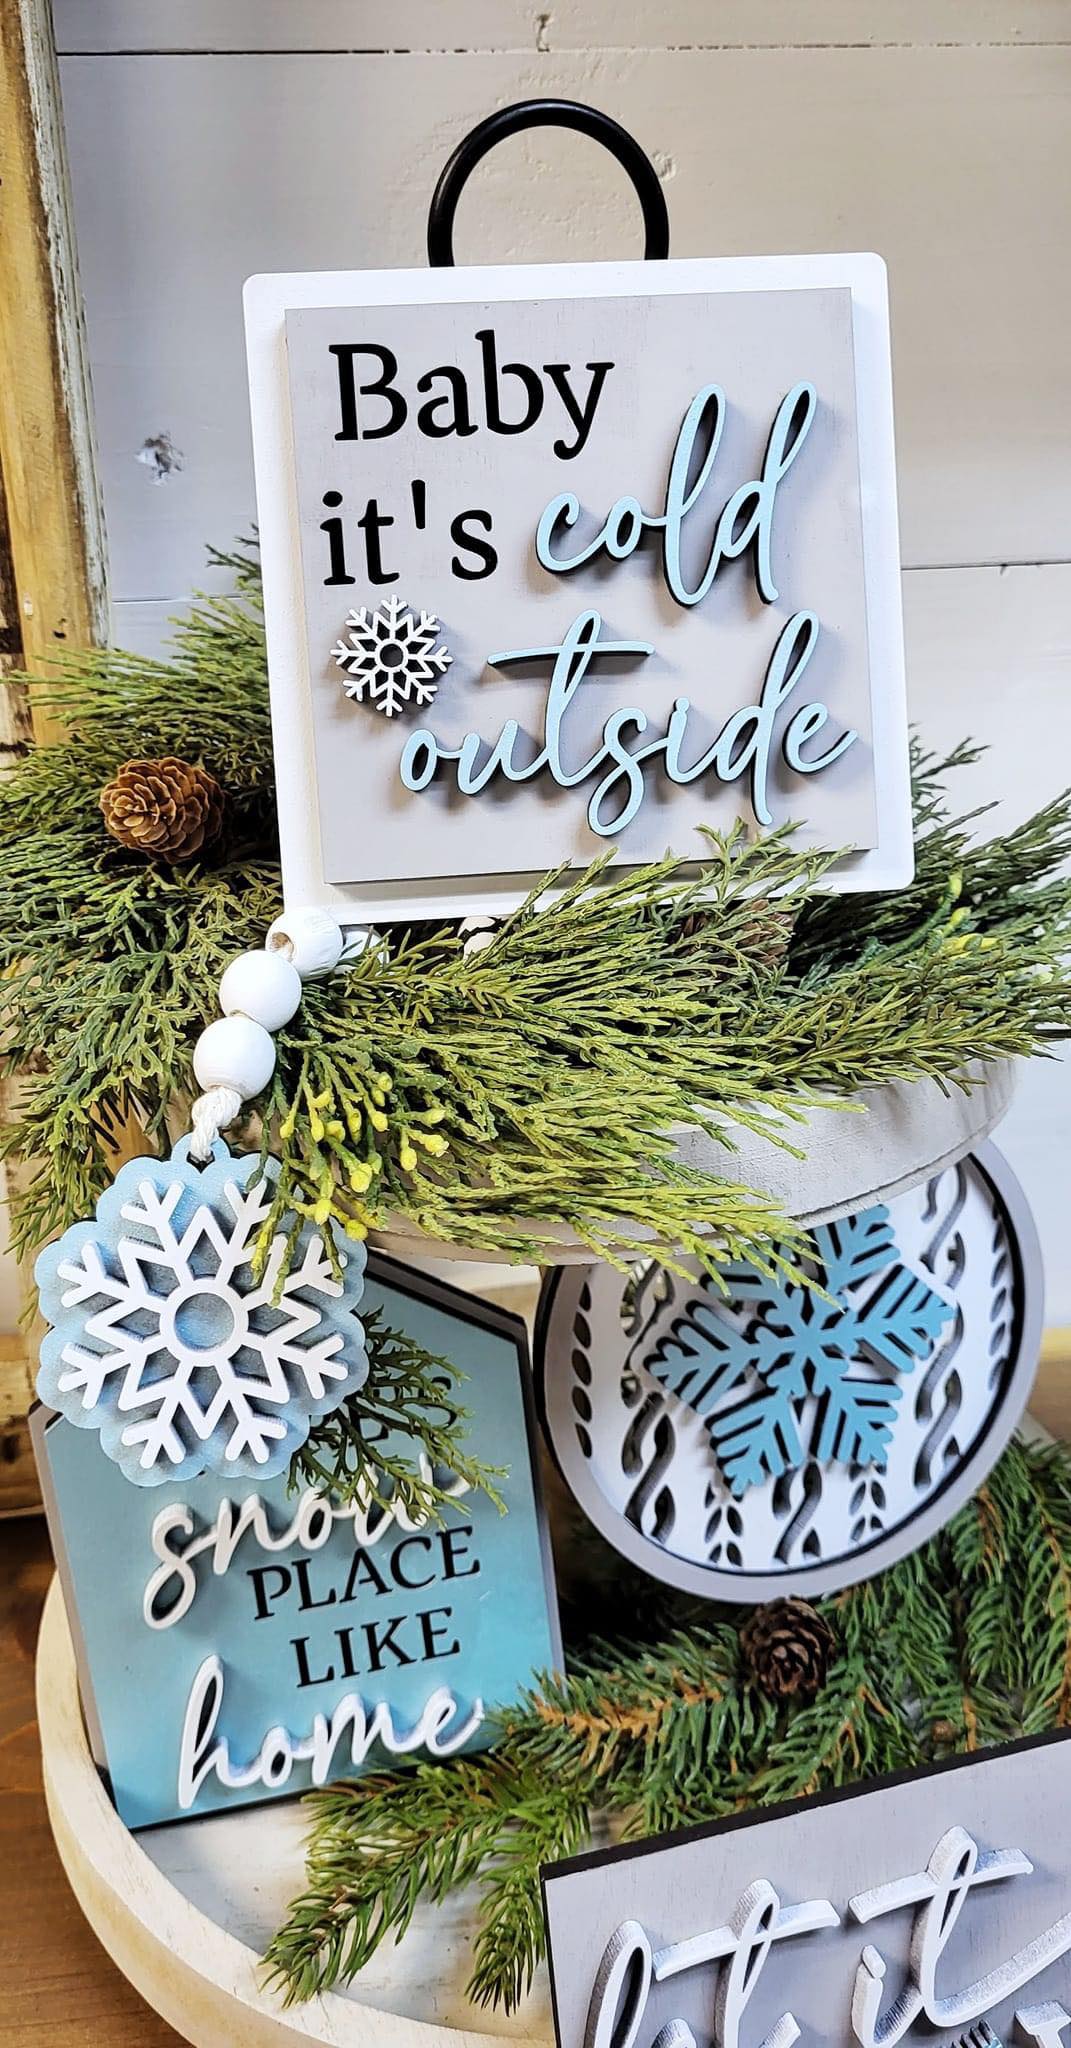 3D Tiered Tray Decor - Baby it's cold outside